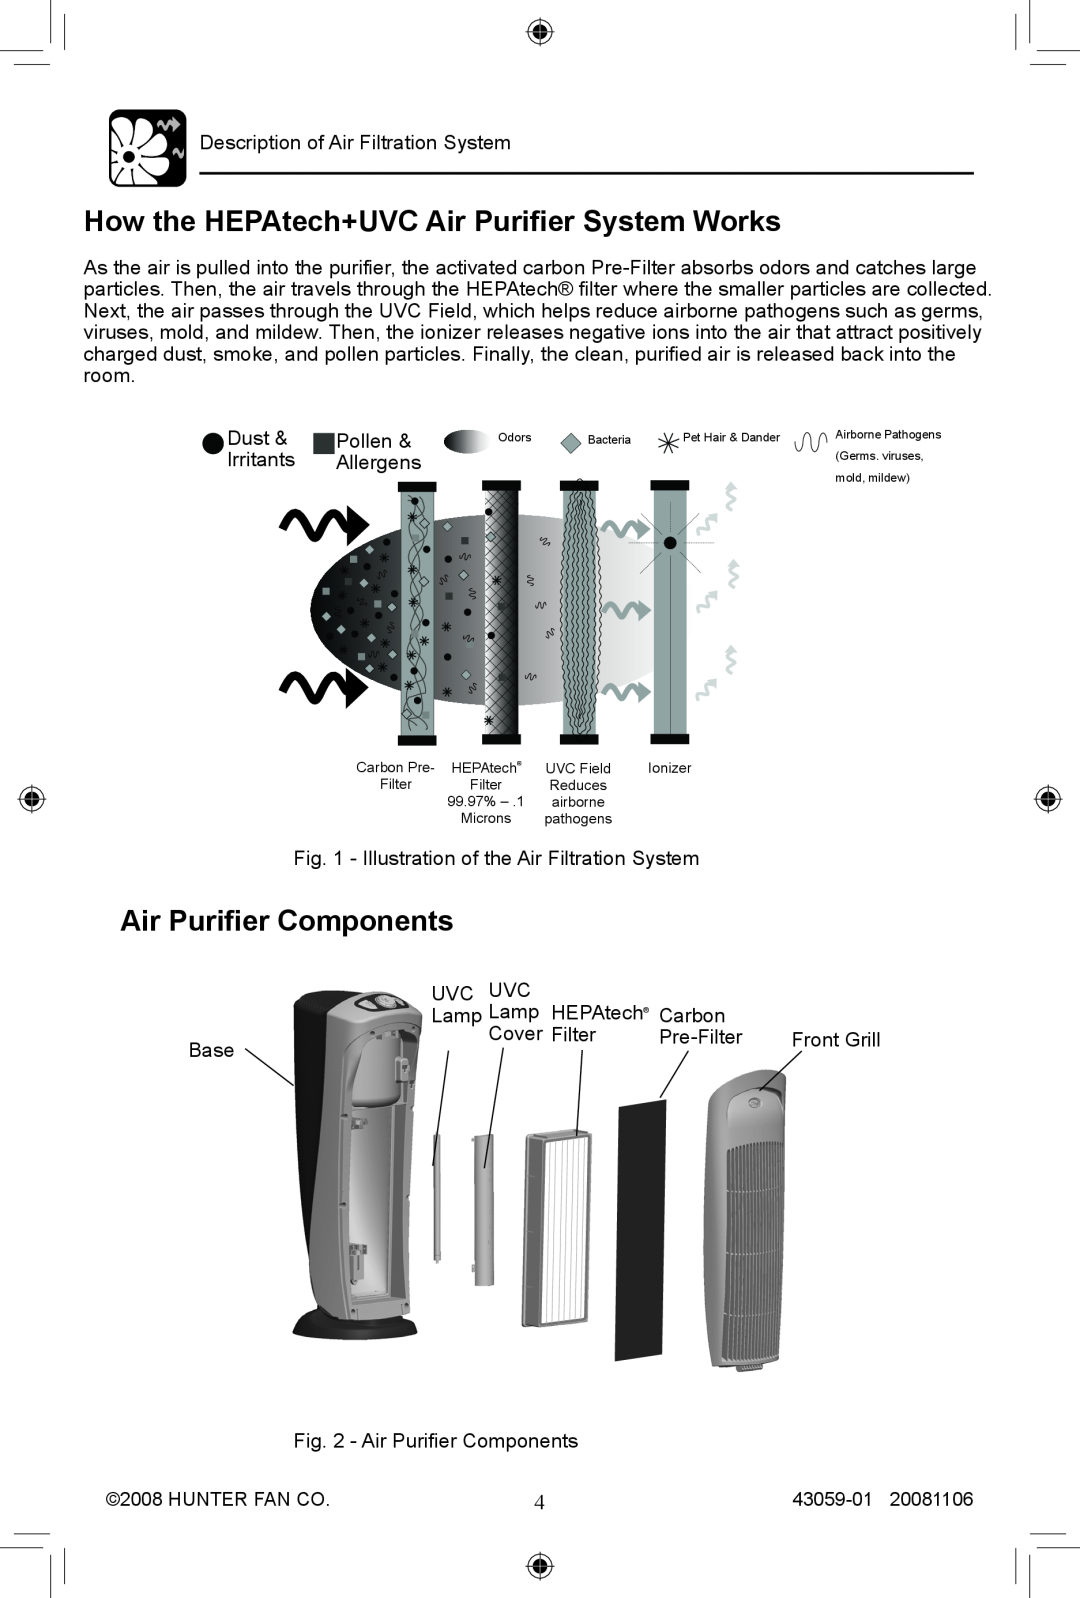 Hunter Fan 30770, 30771 manual How the HEPAtech+UVC Air Purifier System Works, Air Purifier Components 